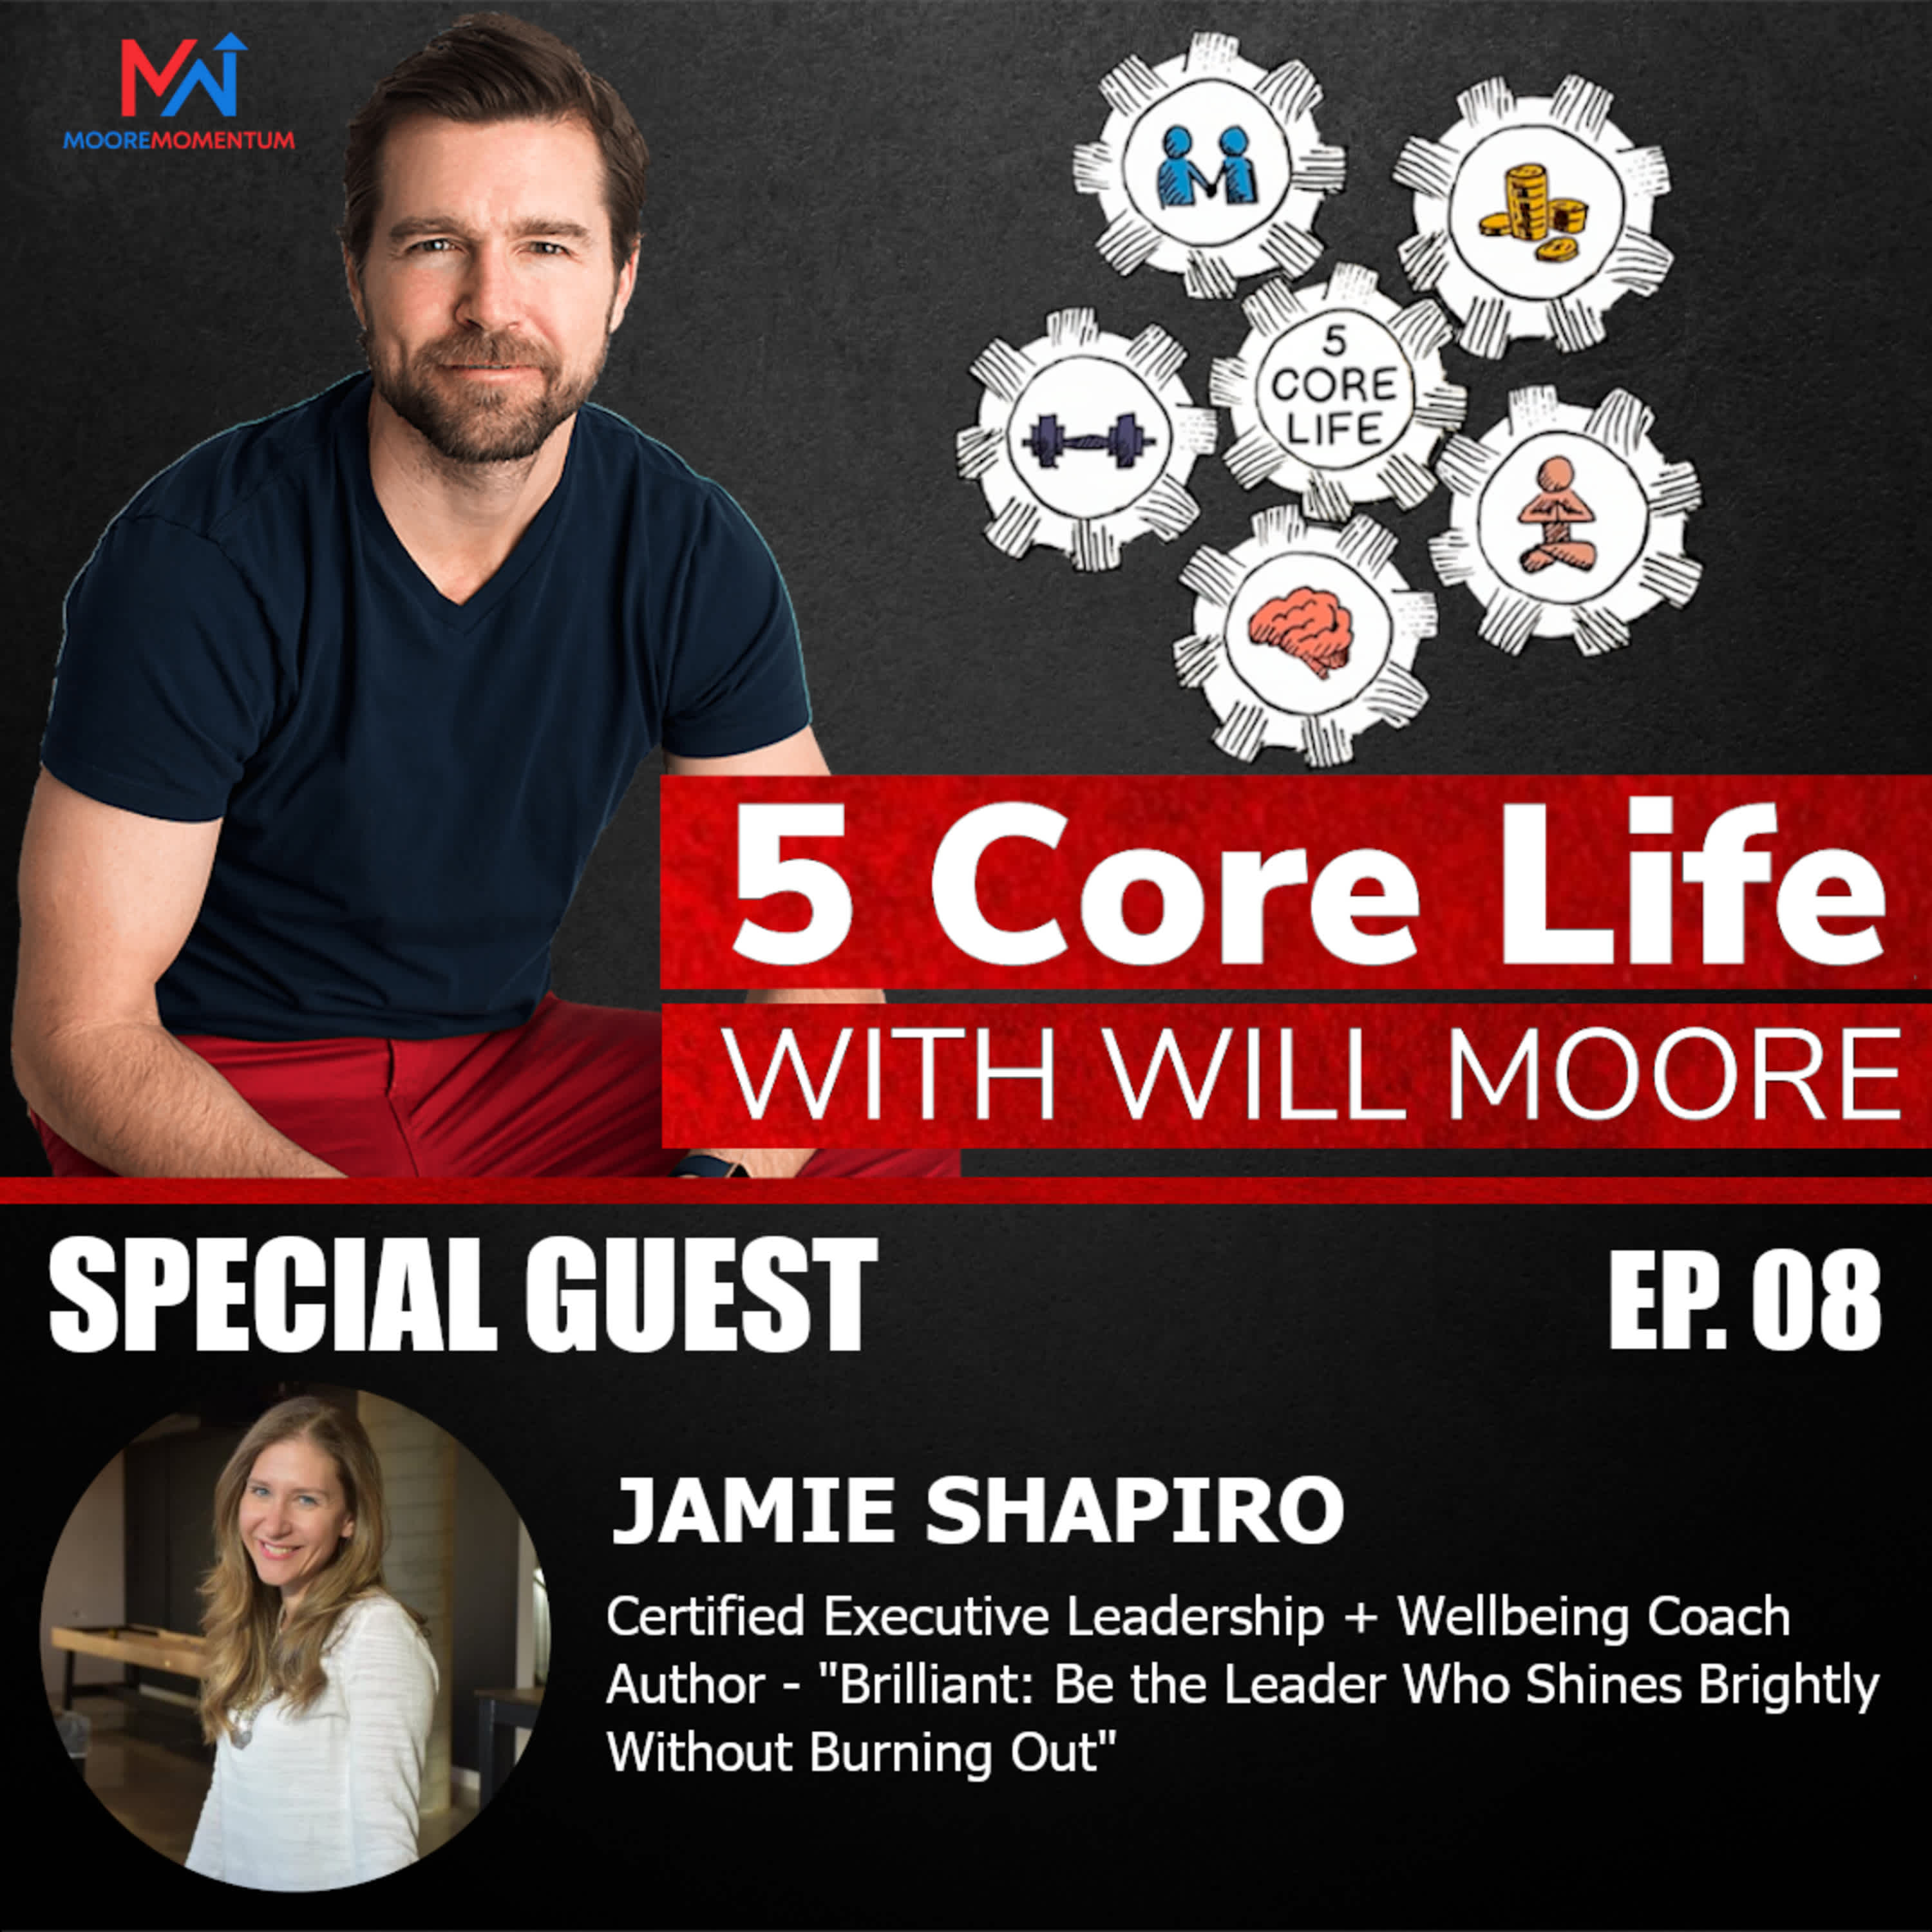 Leaders: Are Your Physical Health & Mindset Helping You Reach Your Peak Leadership Performance? Join Will and Special Guest Jamie Shapiro To See How To Lead With Your "Whole" Self